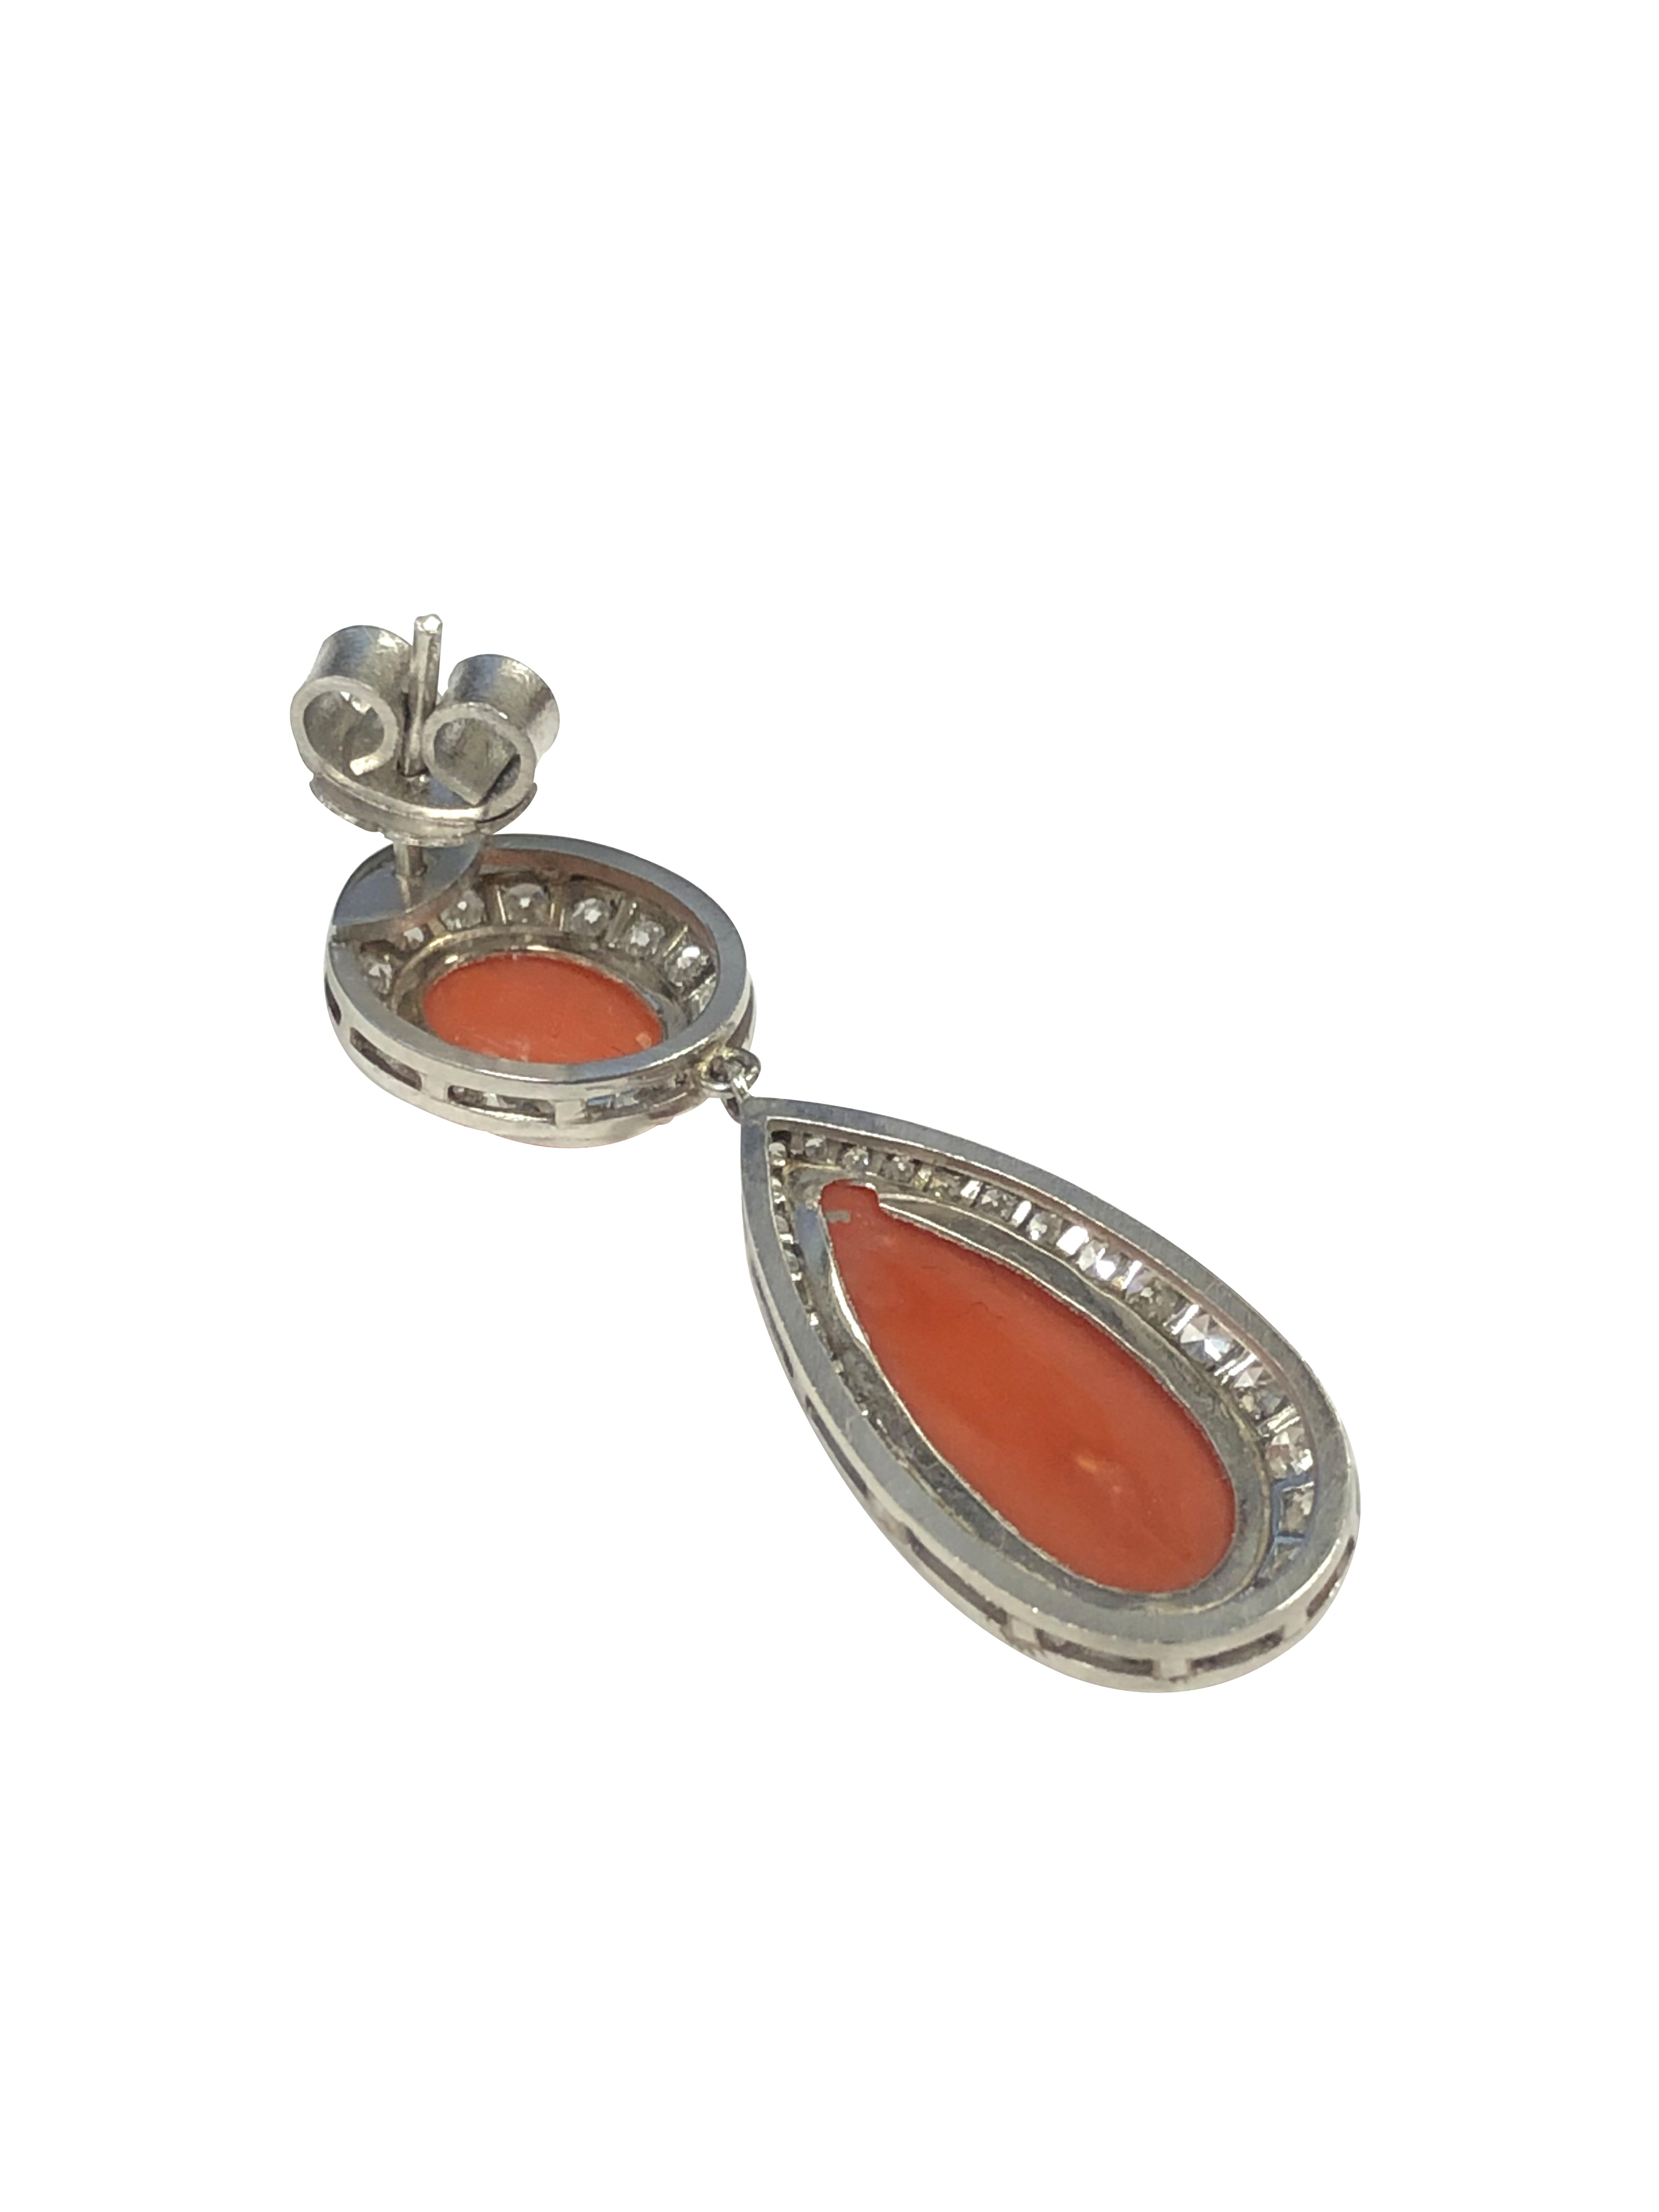 Circa 1980 Platinum Dangle Earrings, measuring 1  1/2 inches in length X 1/2 inch wide. Set with Single and old cut Diamonds totaling 2 Carats and further set with Very Fine Red-Orange Coral. 